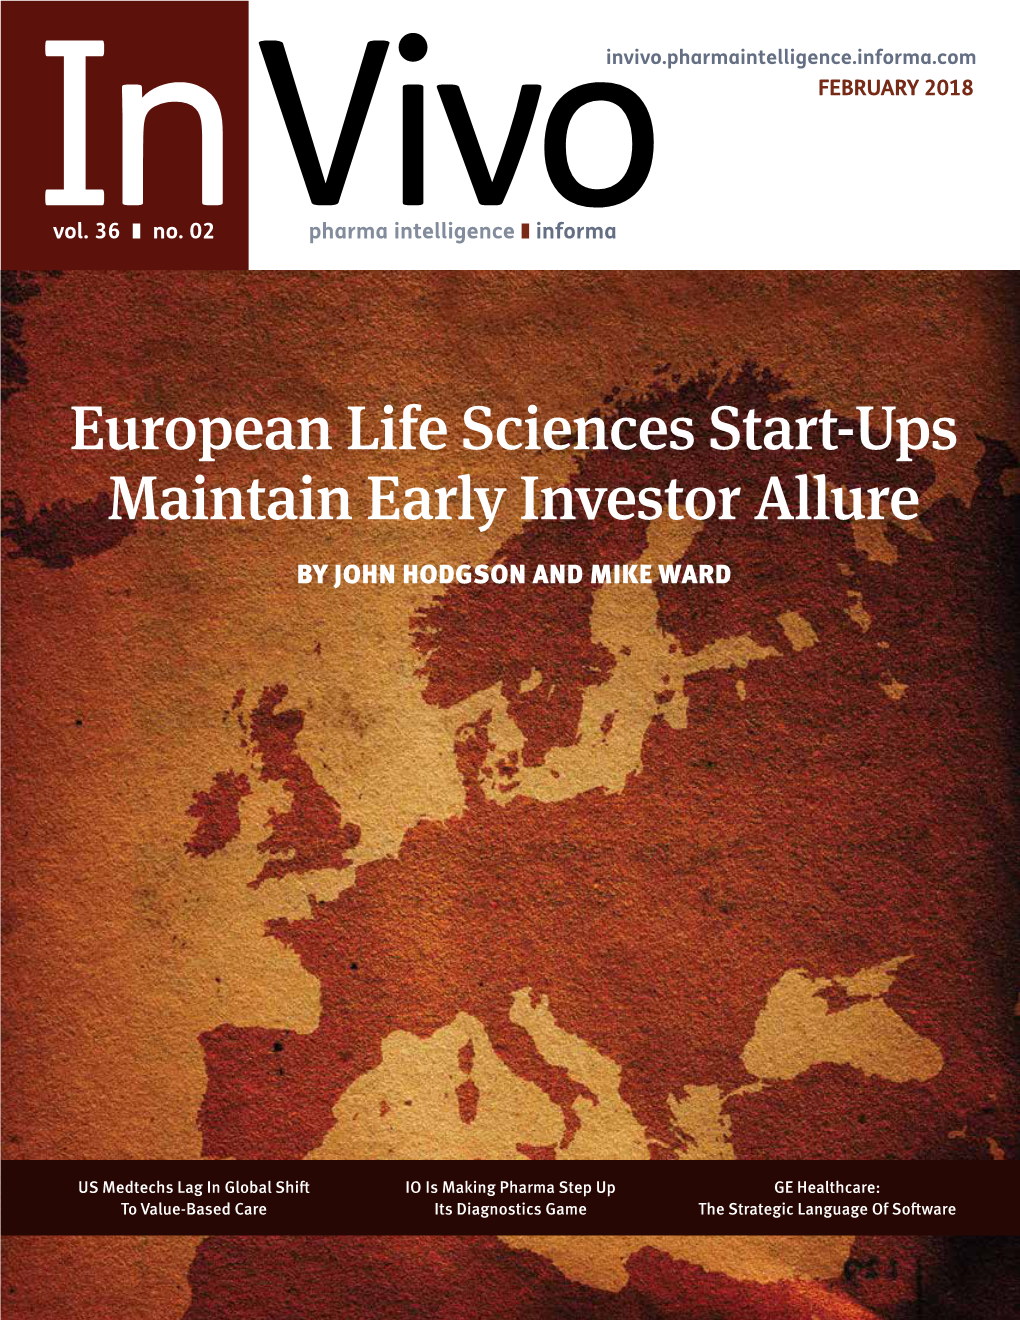 European Life Sciences Start-Ups Maintain Early Investor Allure